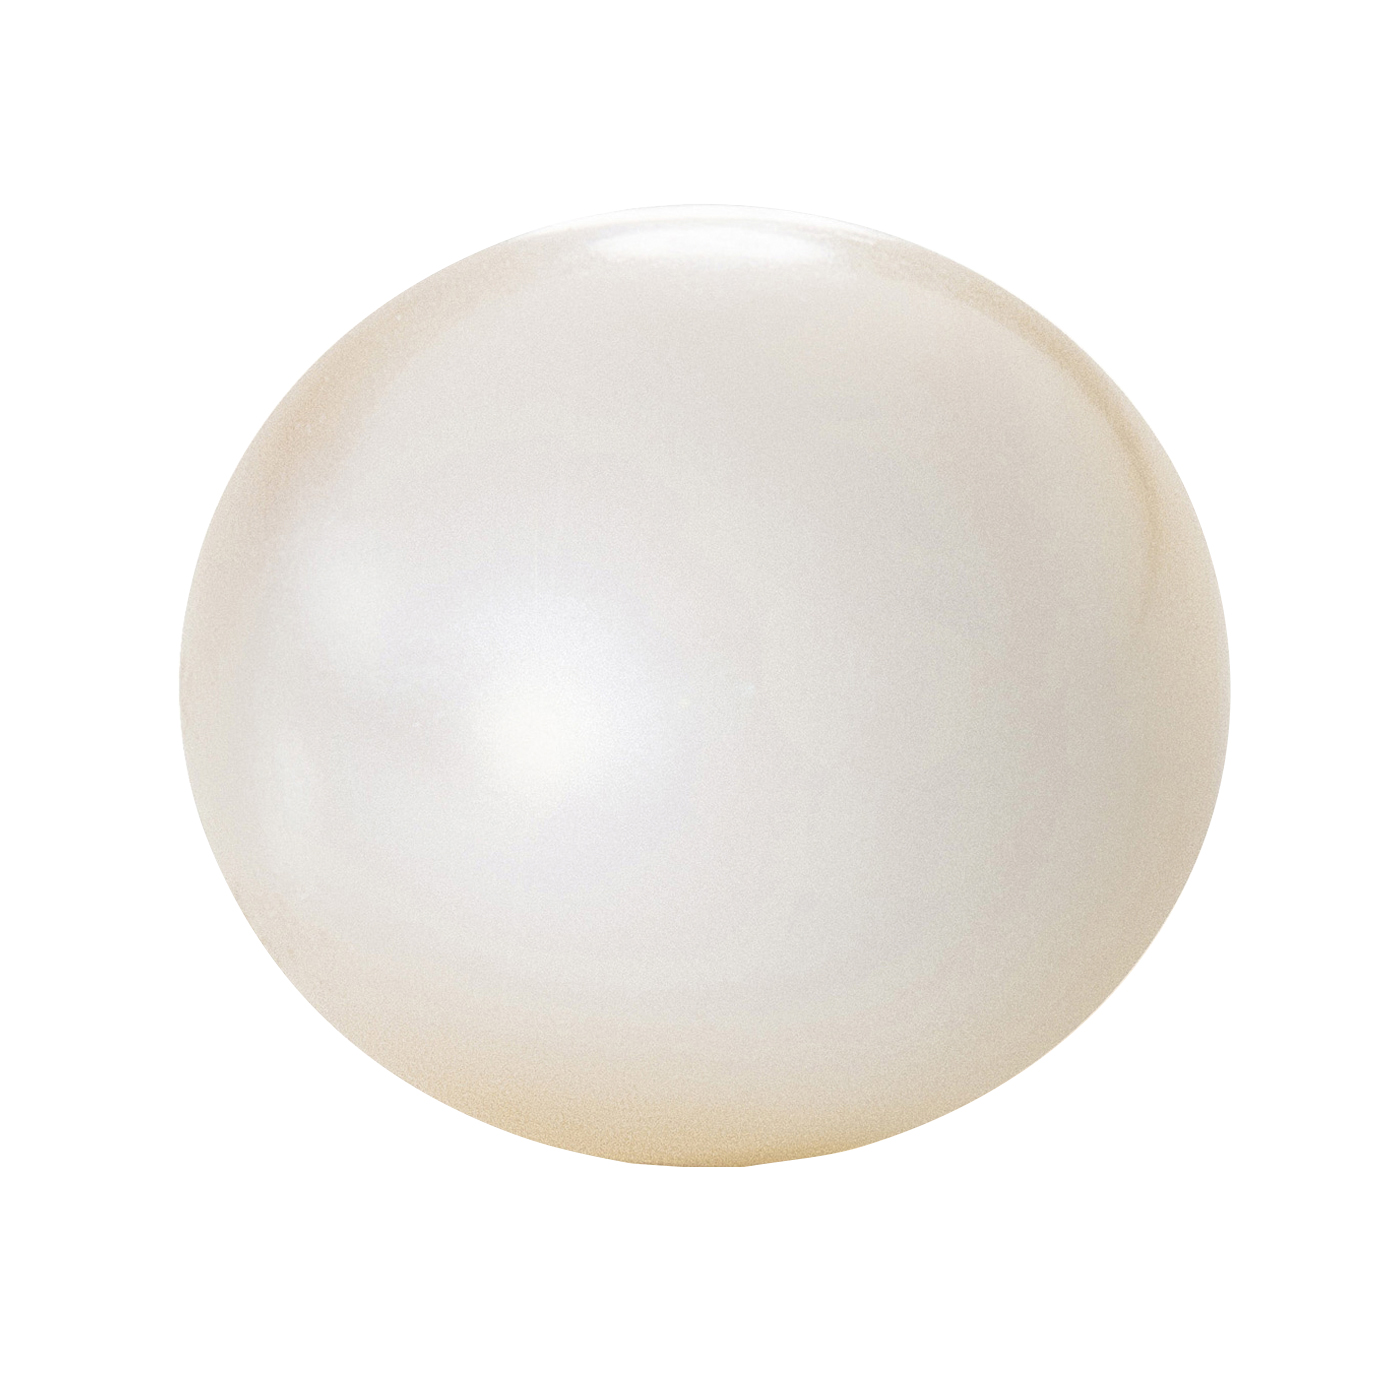 Cultured Pearl, Freshwater, Bouton, ø 4.0-4.5 mm, White - 1 piece